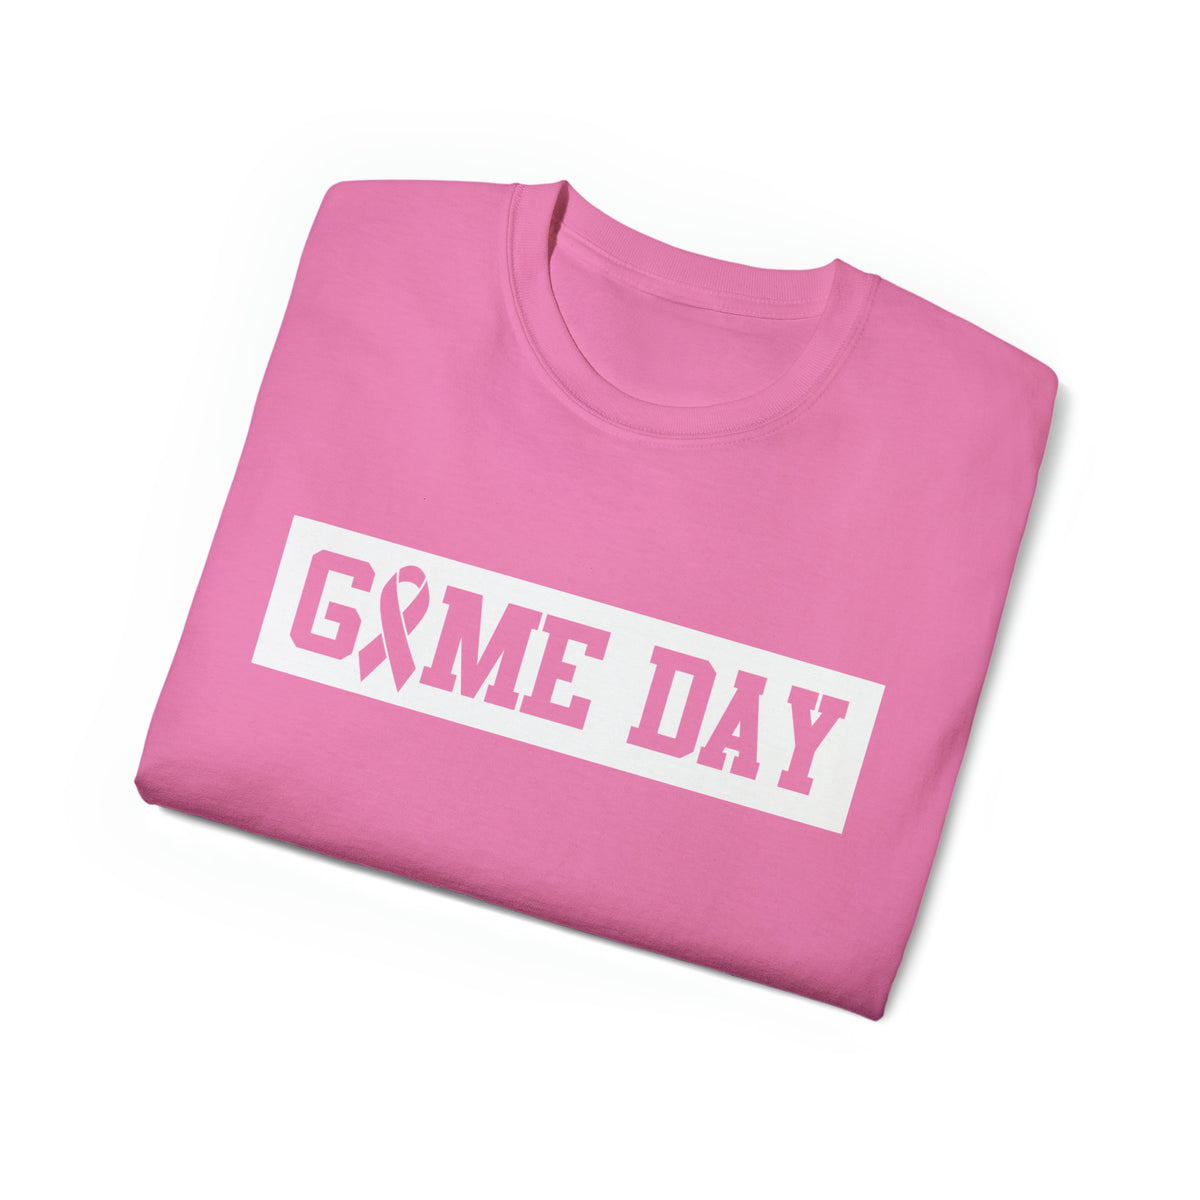 GAME DAY Breast Cancer Adult T-Shirt